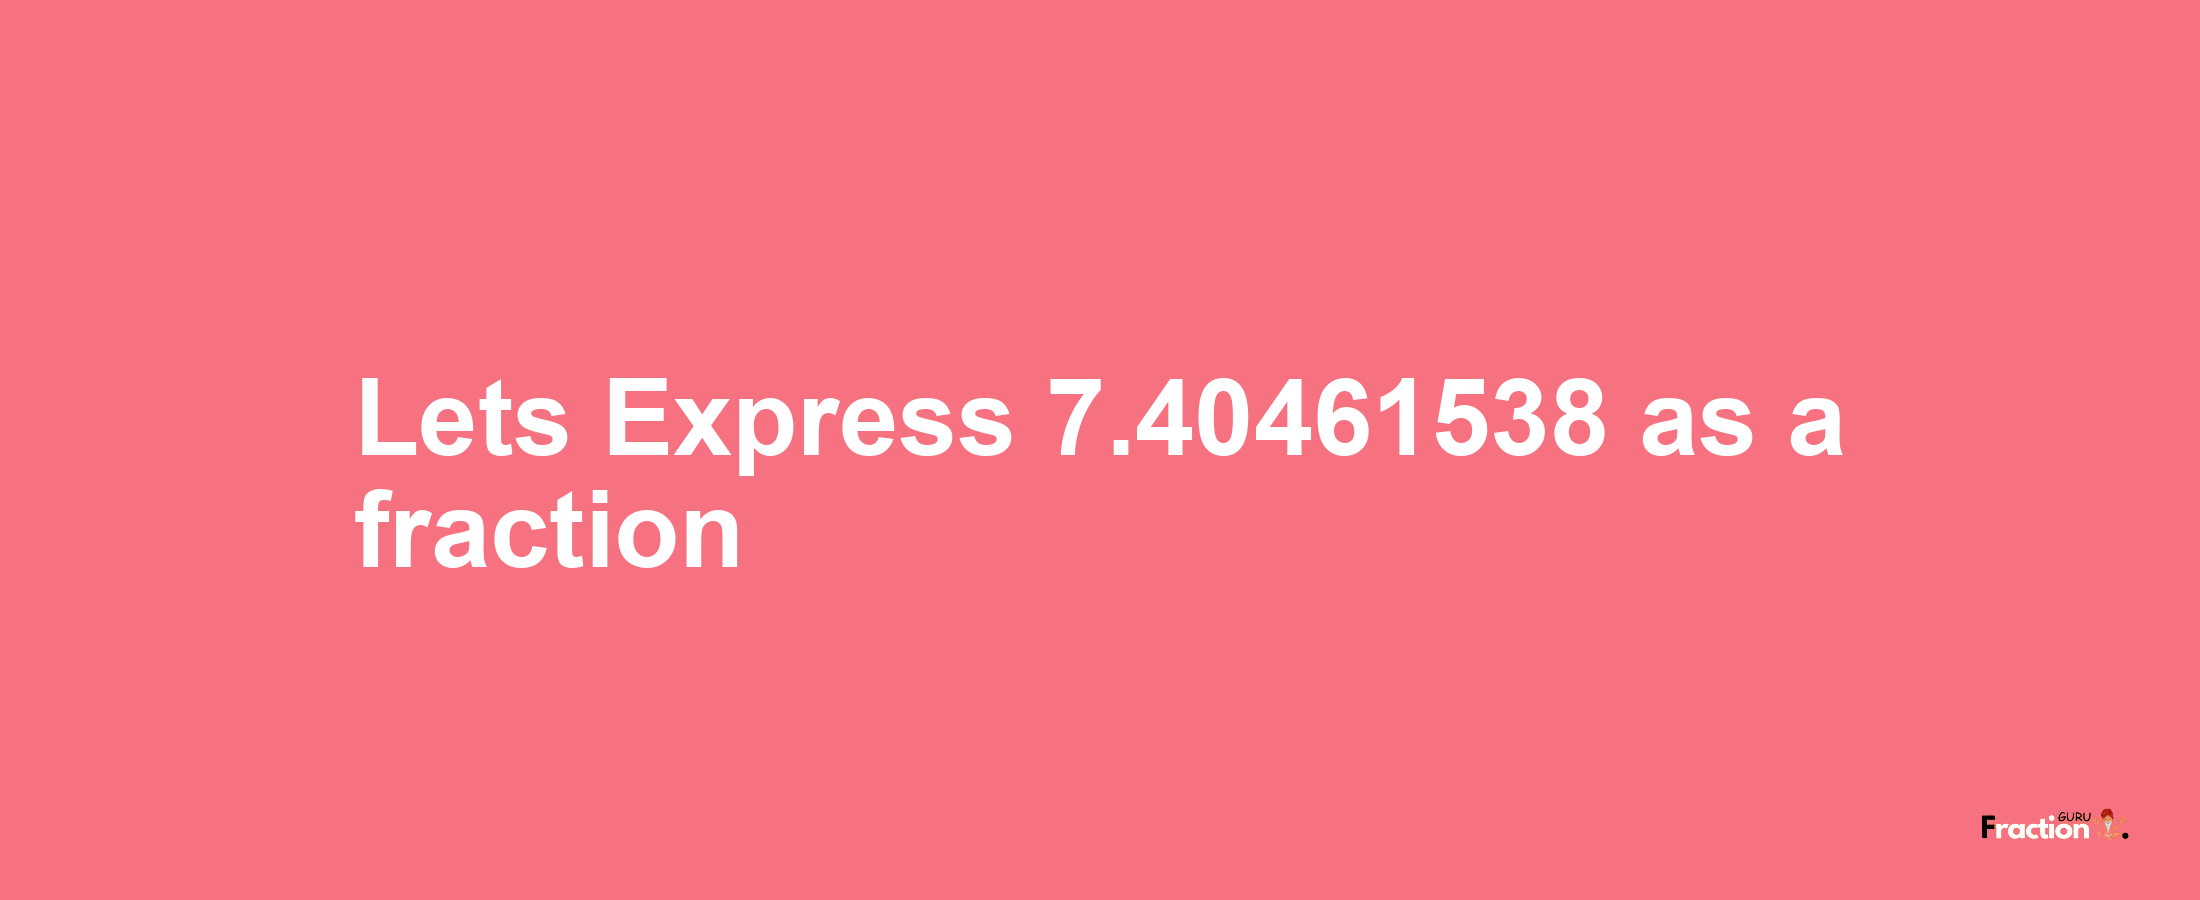 Lets Express 7.40461538 as afraction